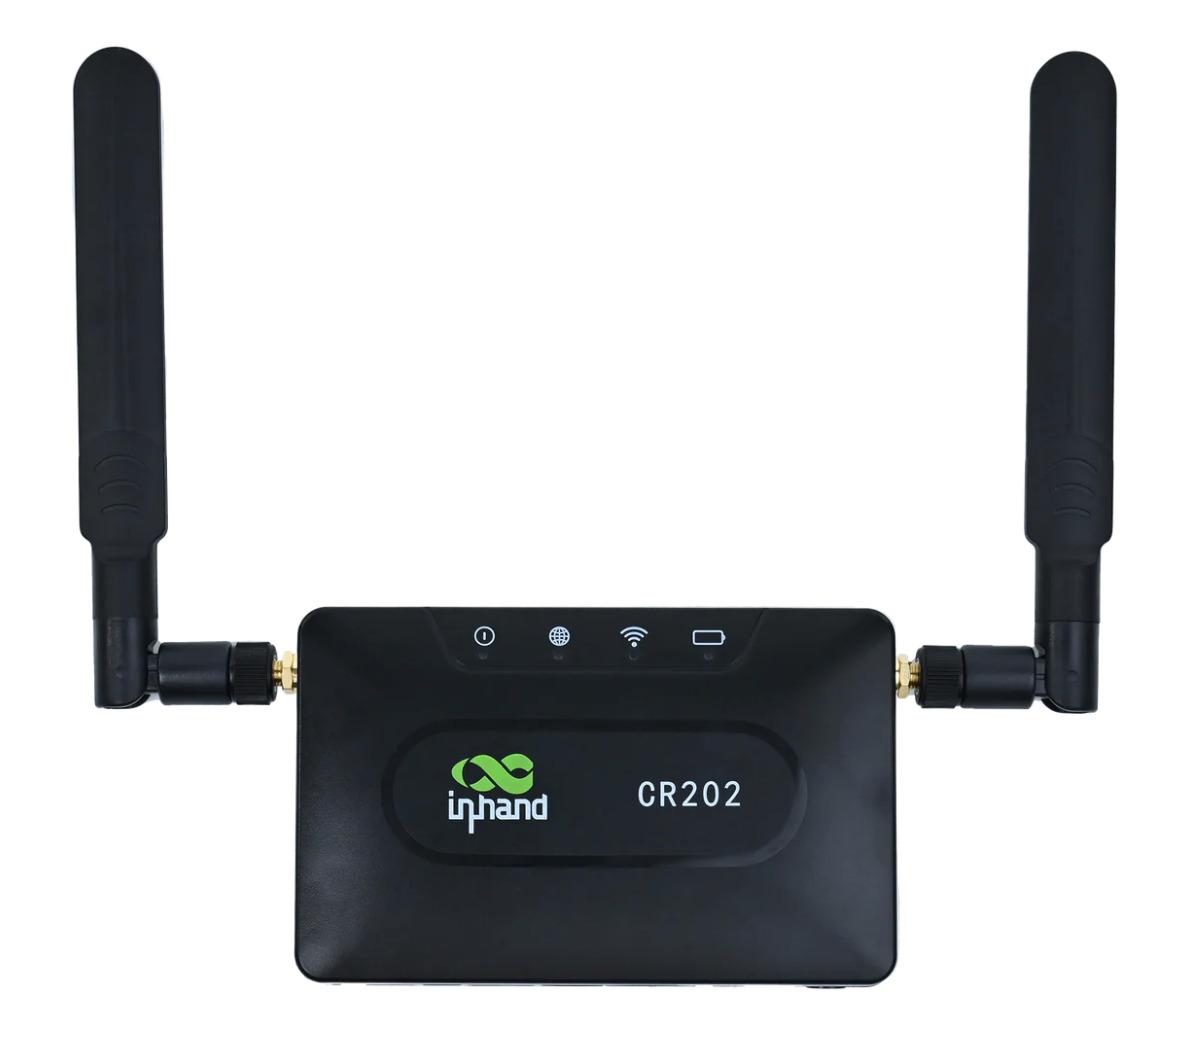 InHand CR202 4G LTE CAT6 Pocket Portable Wi-Fi Router Cloud Managed